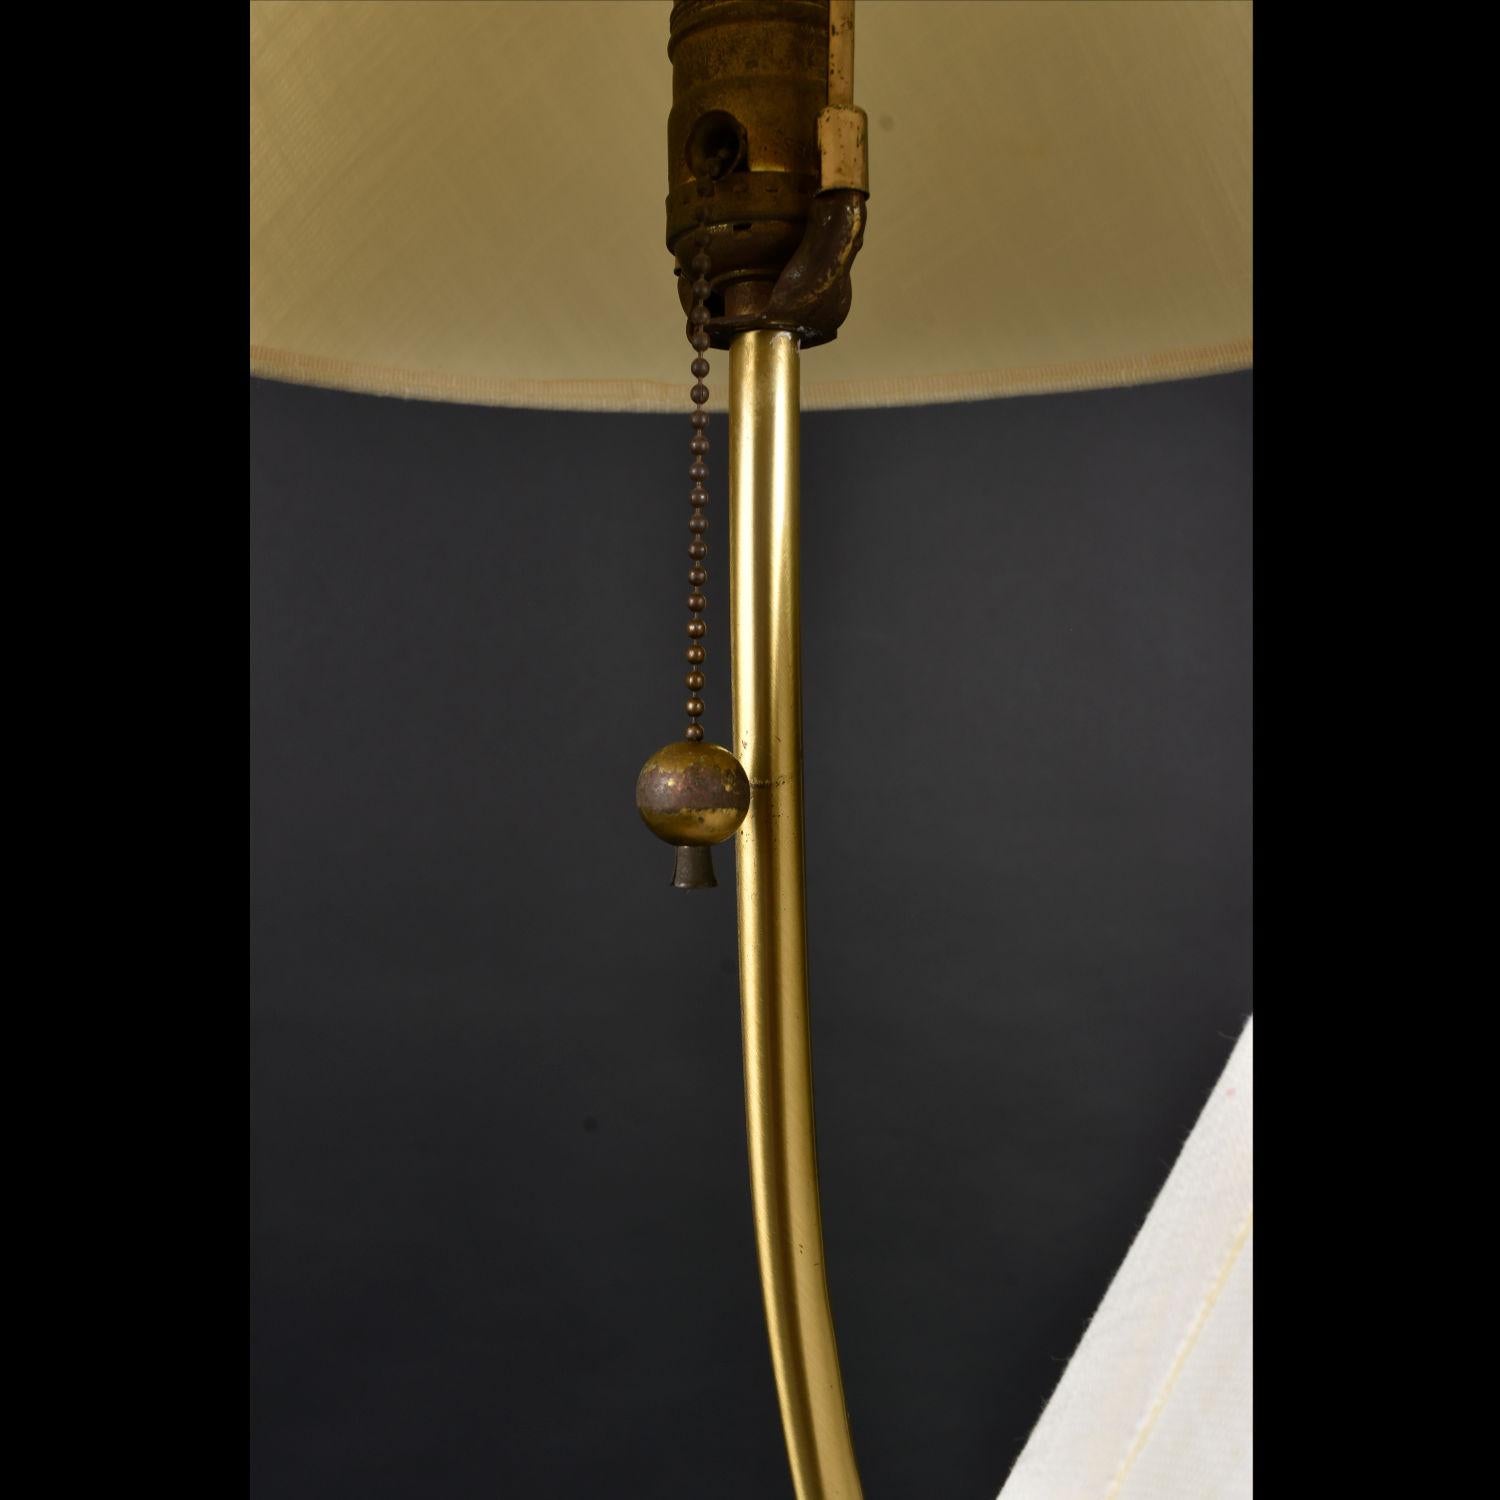 table lamp with two heads